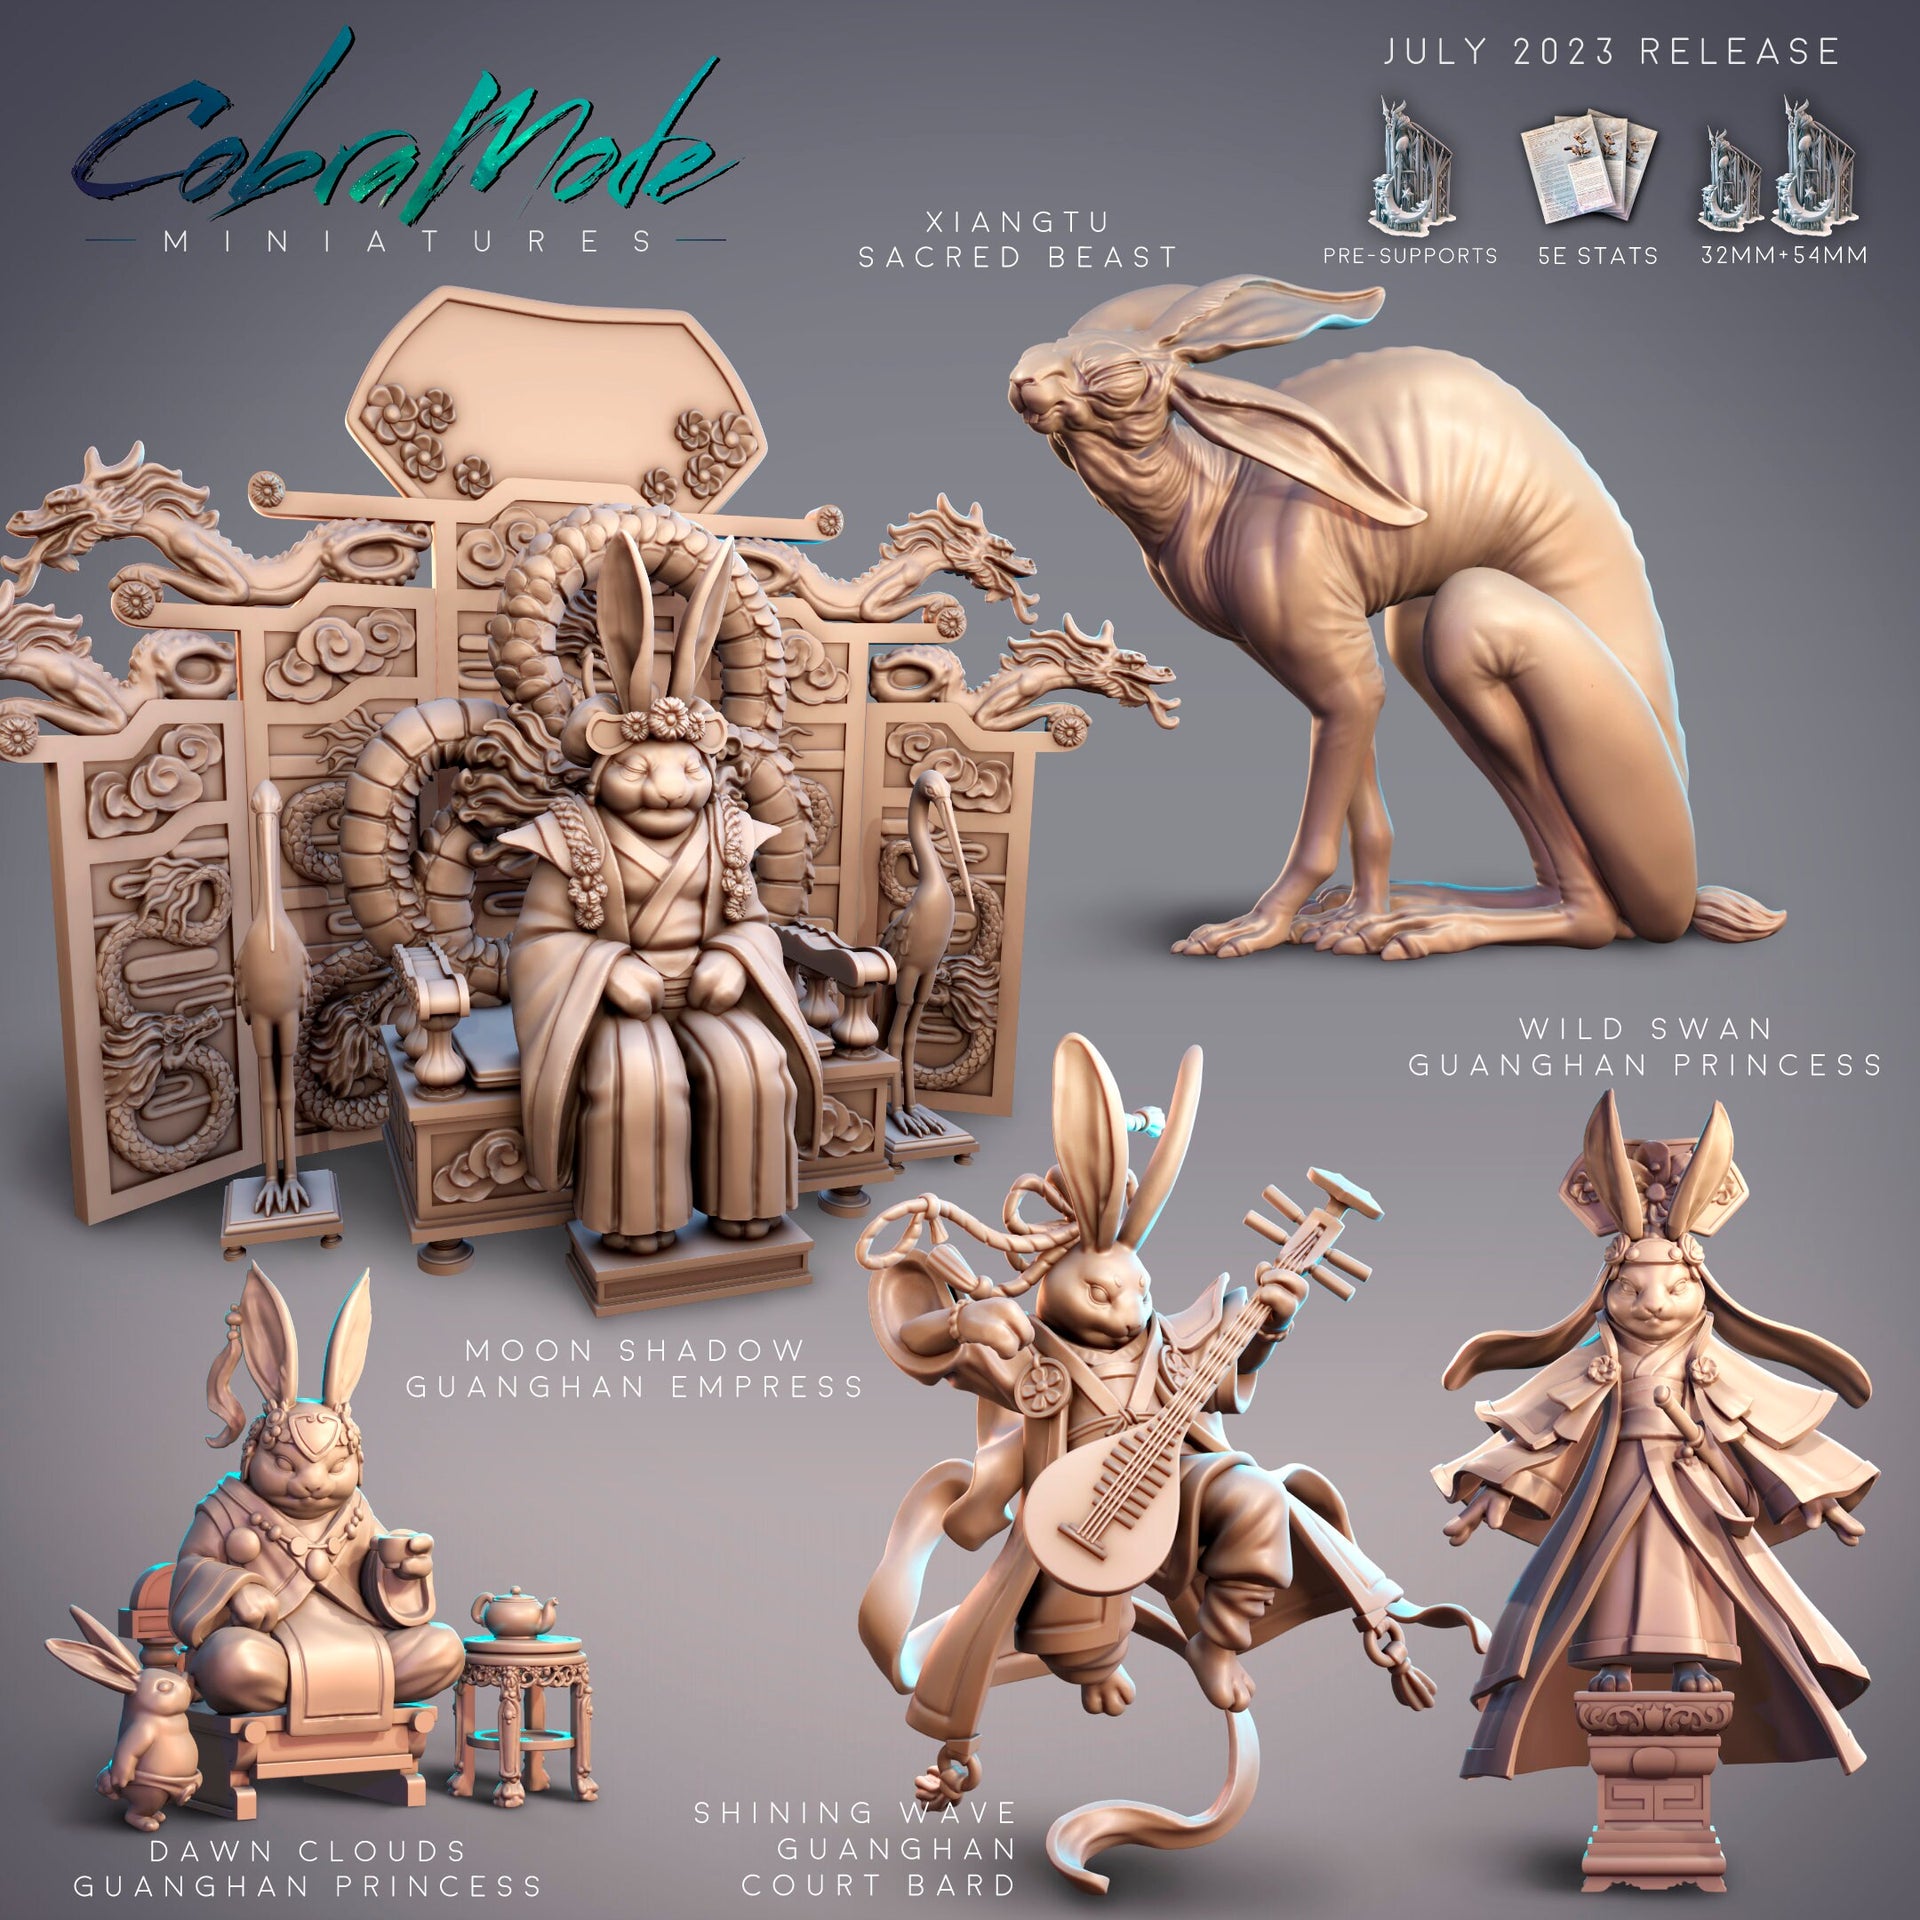 Guanghan Empress Moon Shadow, Rabbit Queen- CobraMode | Miniature | Wargaming | Roleplaying Games | 32mm | Throne